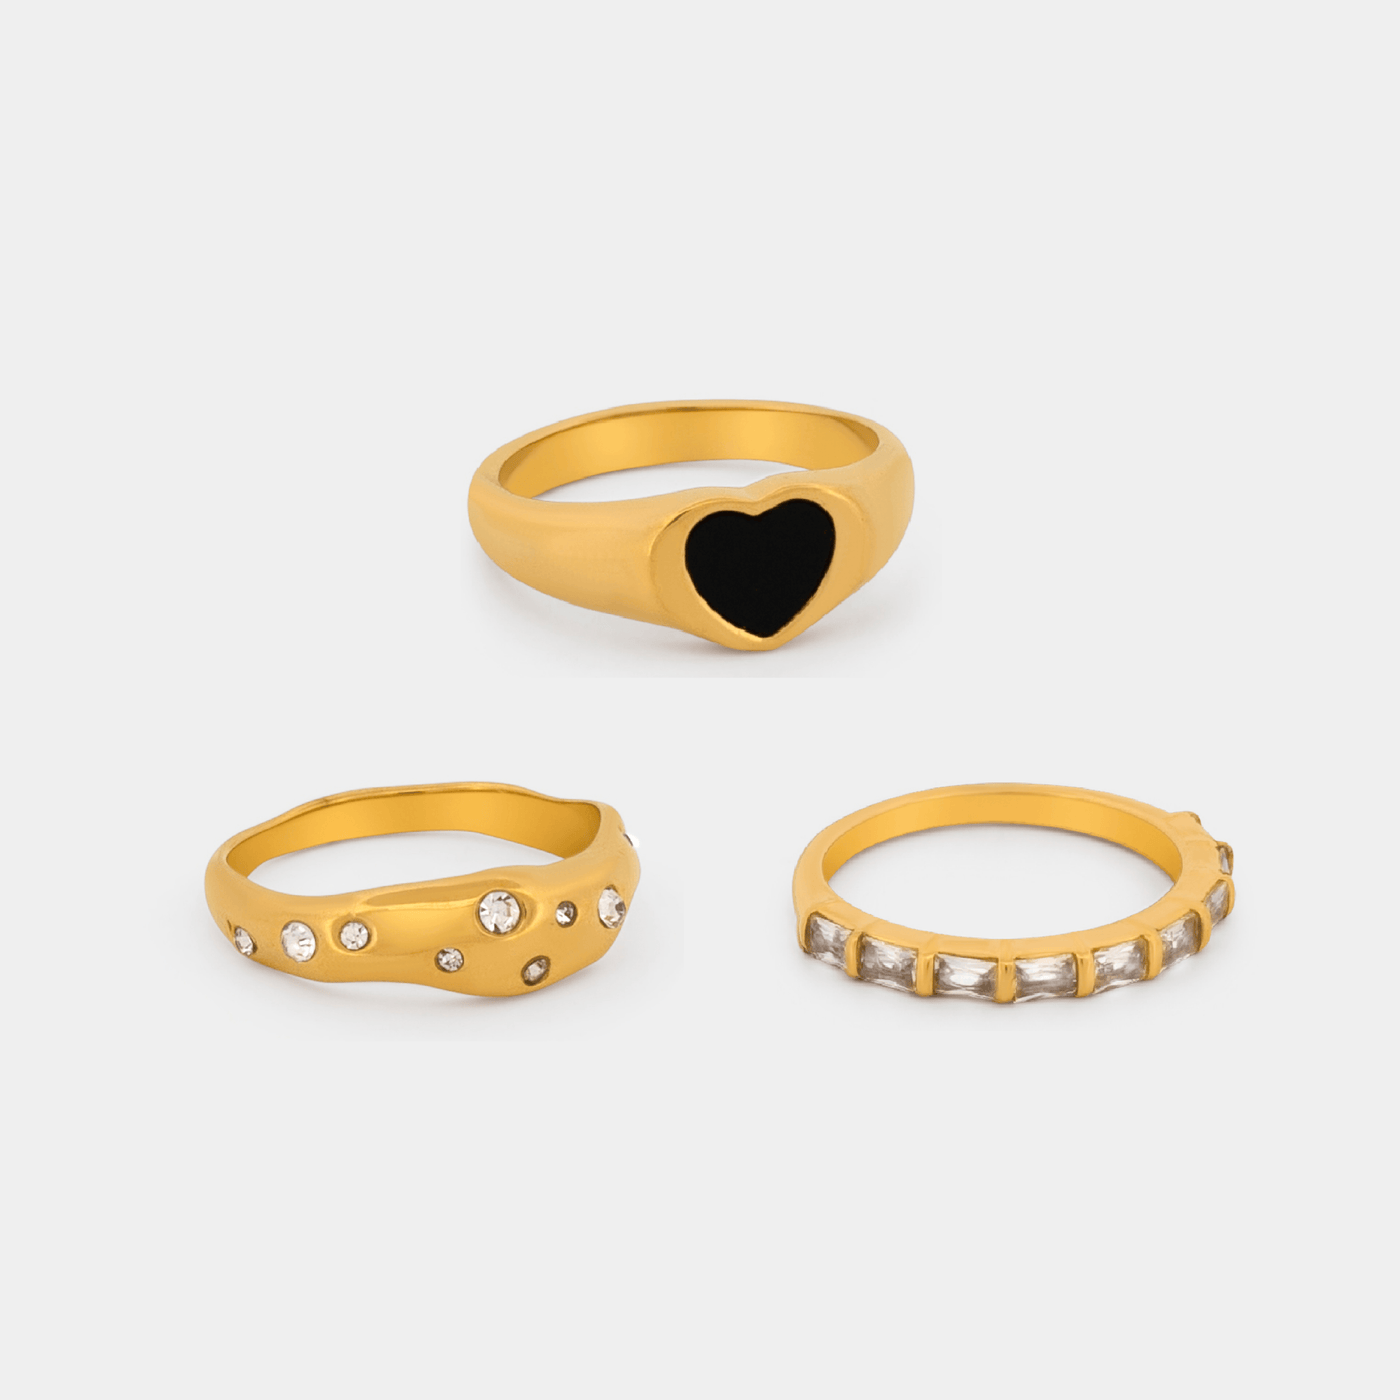 Gold ring stack bundle, heart signet ring, CZ dome ring and thin cz band ring 